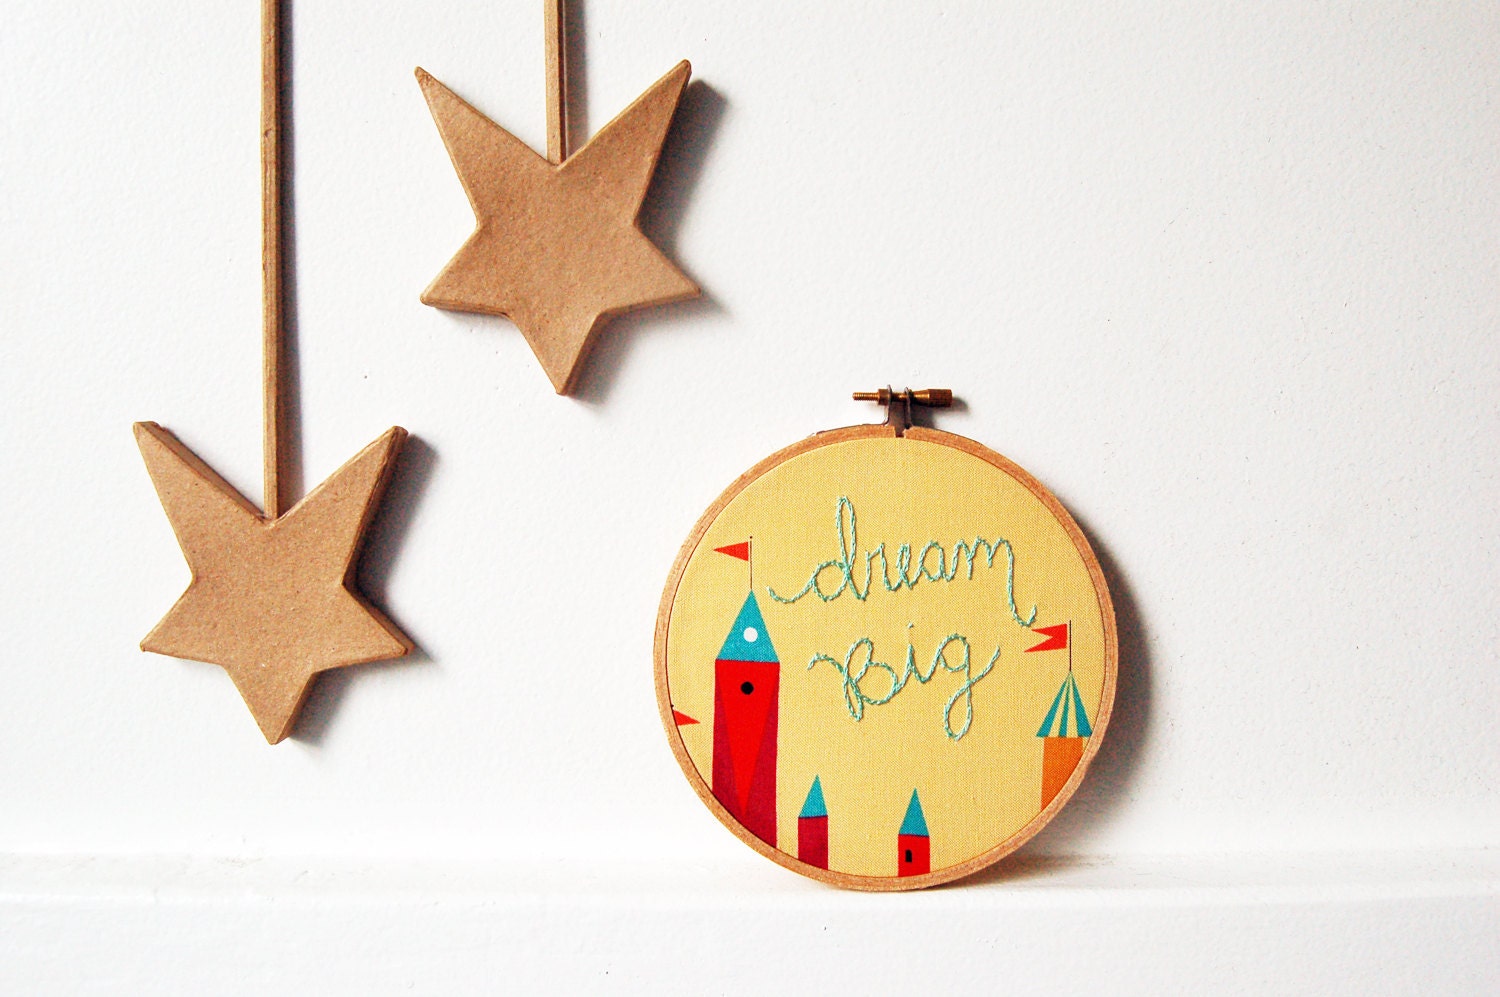 Embroidered Text in Hoop, Dream Big, 5 inch. Whimsical, Colorful Castles. Handmade by merriweathercouncil on Etsy